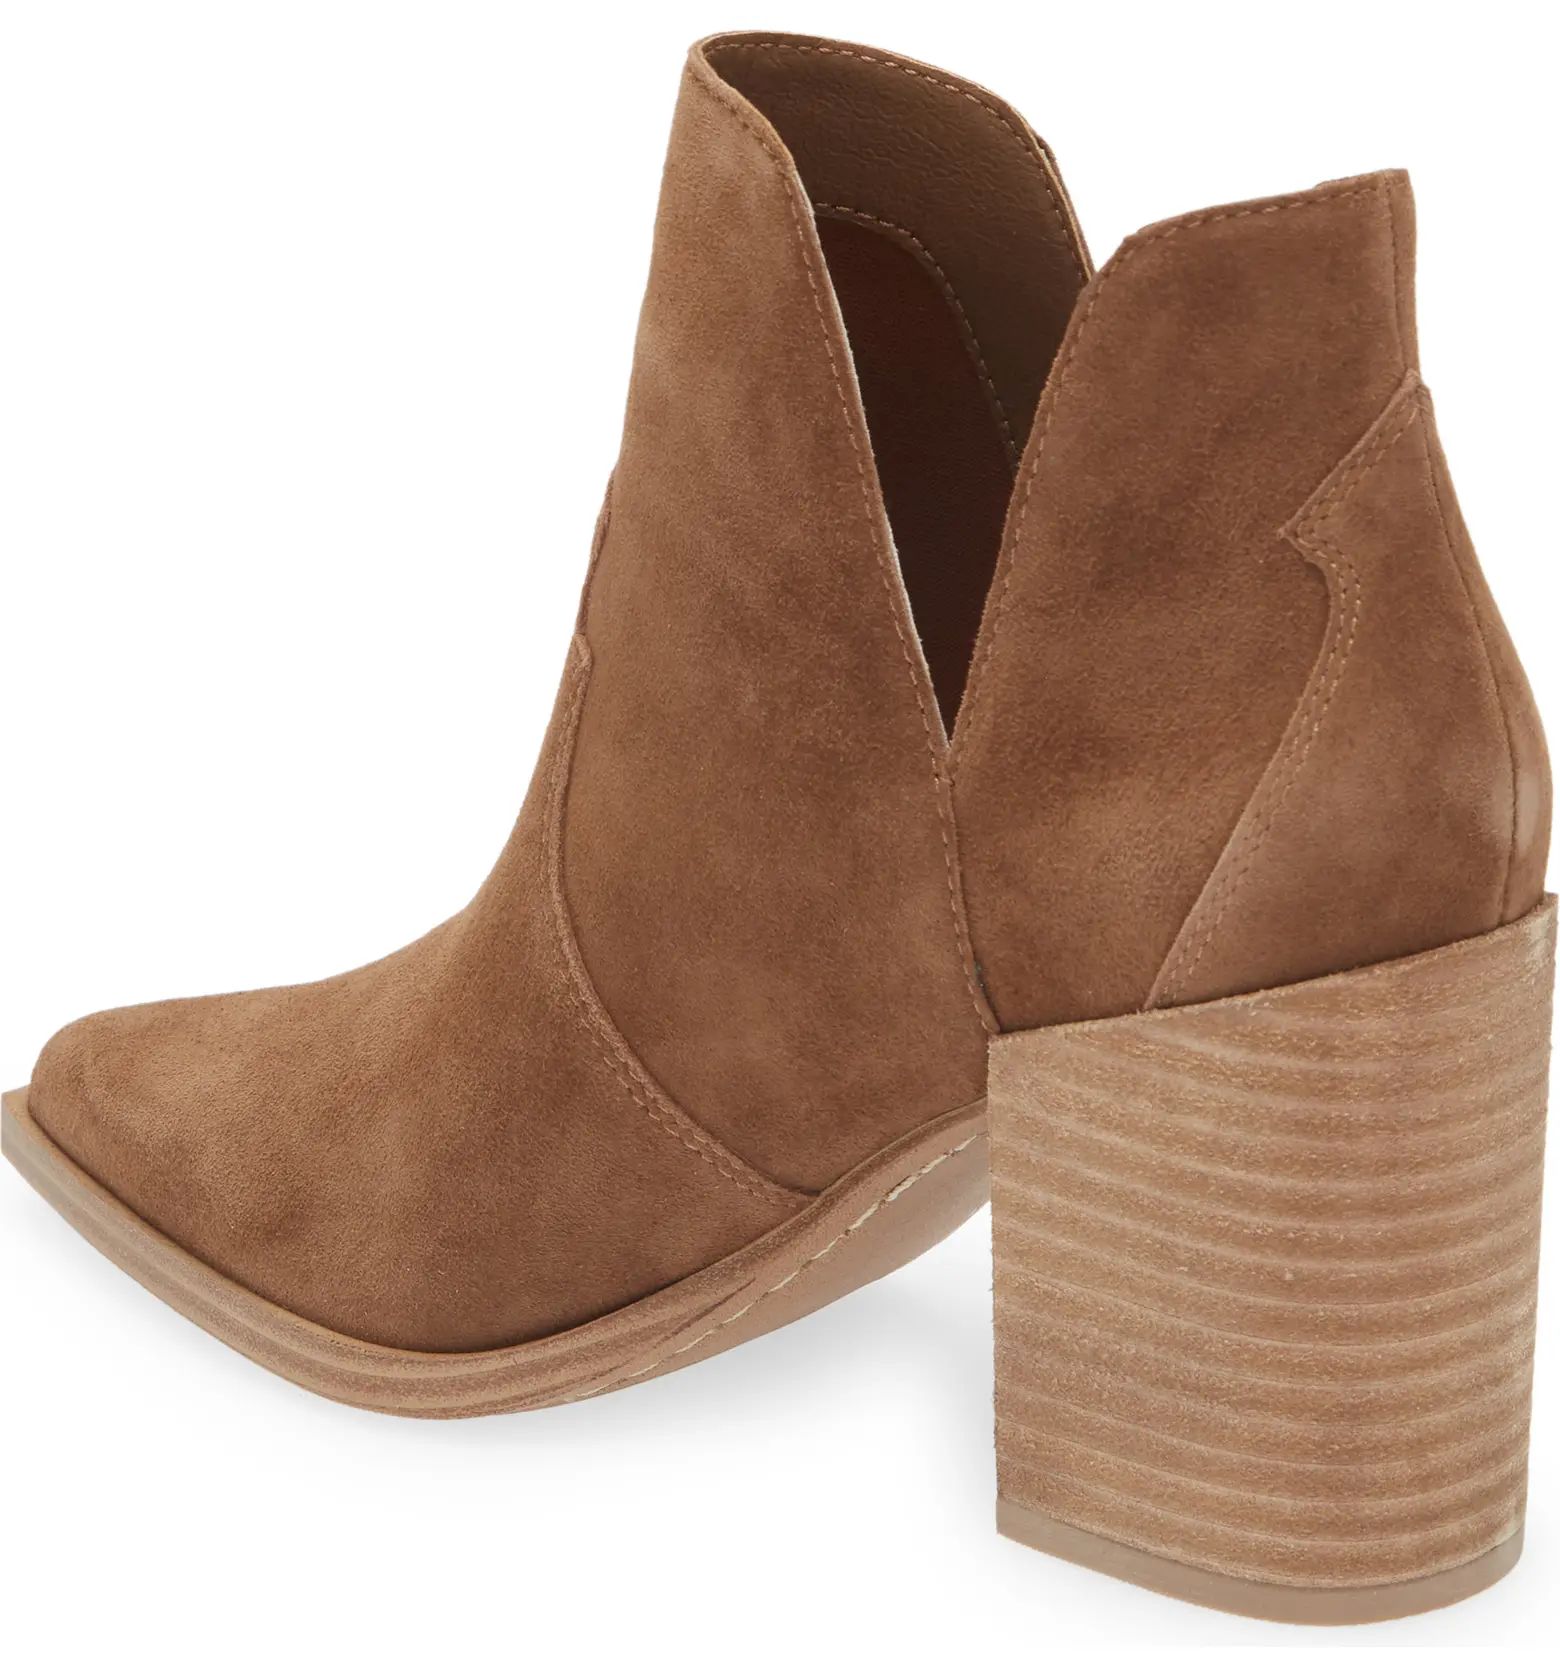 Chaya Pointed Toe Bootie | Nordstrom